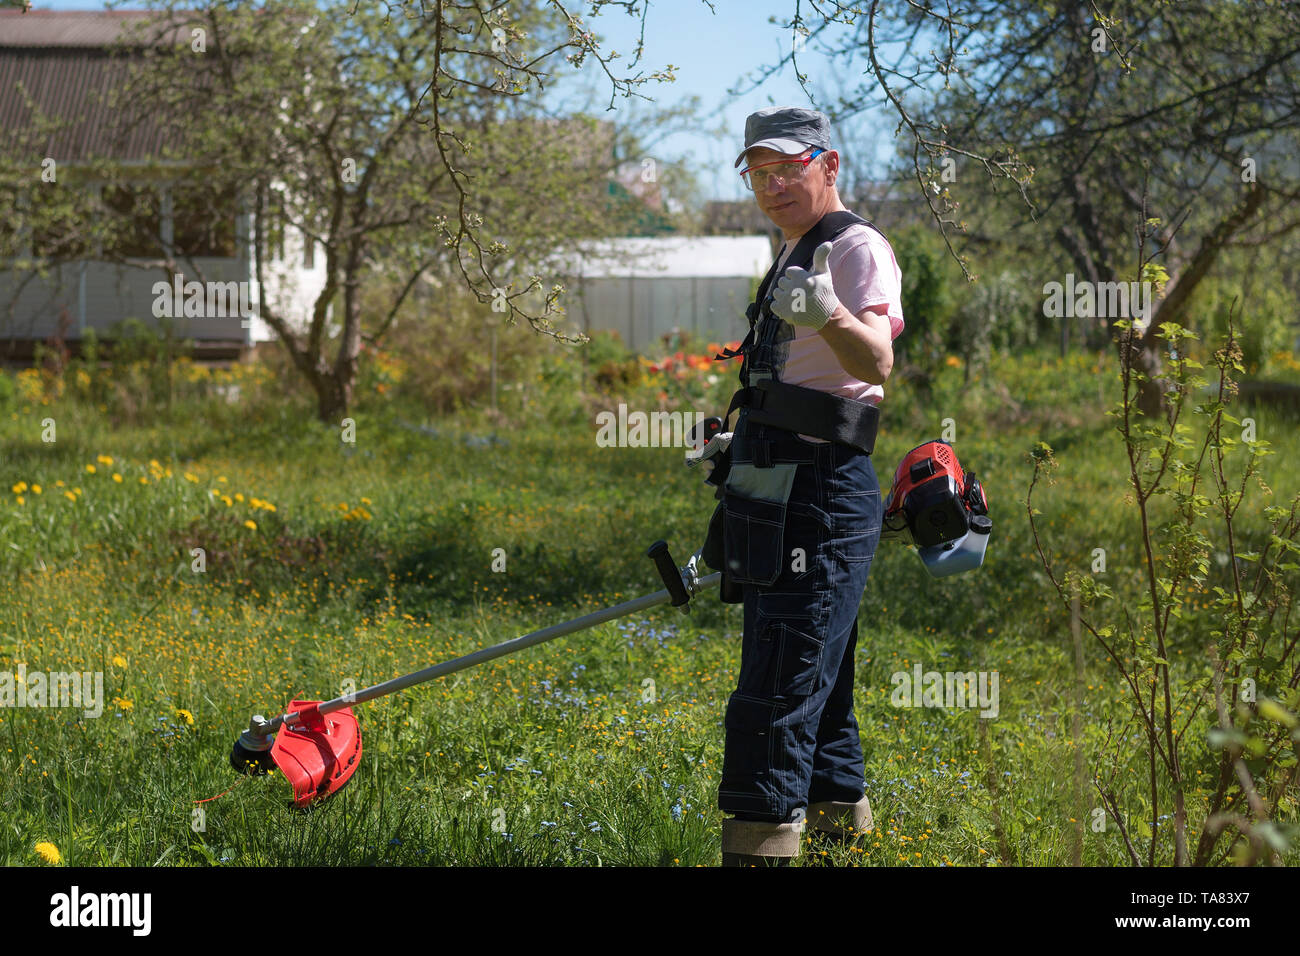 A man mows the grass on the lawn mowers. Overalls and tools Stock Photo